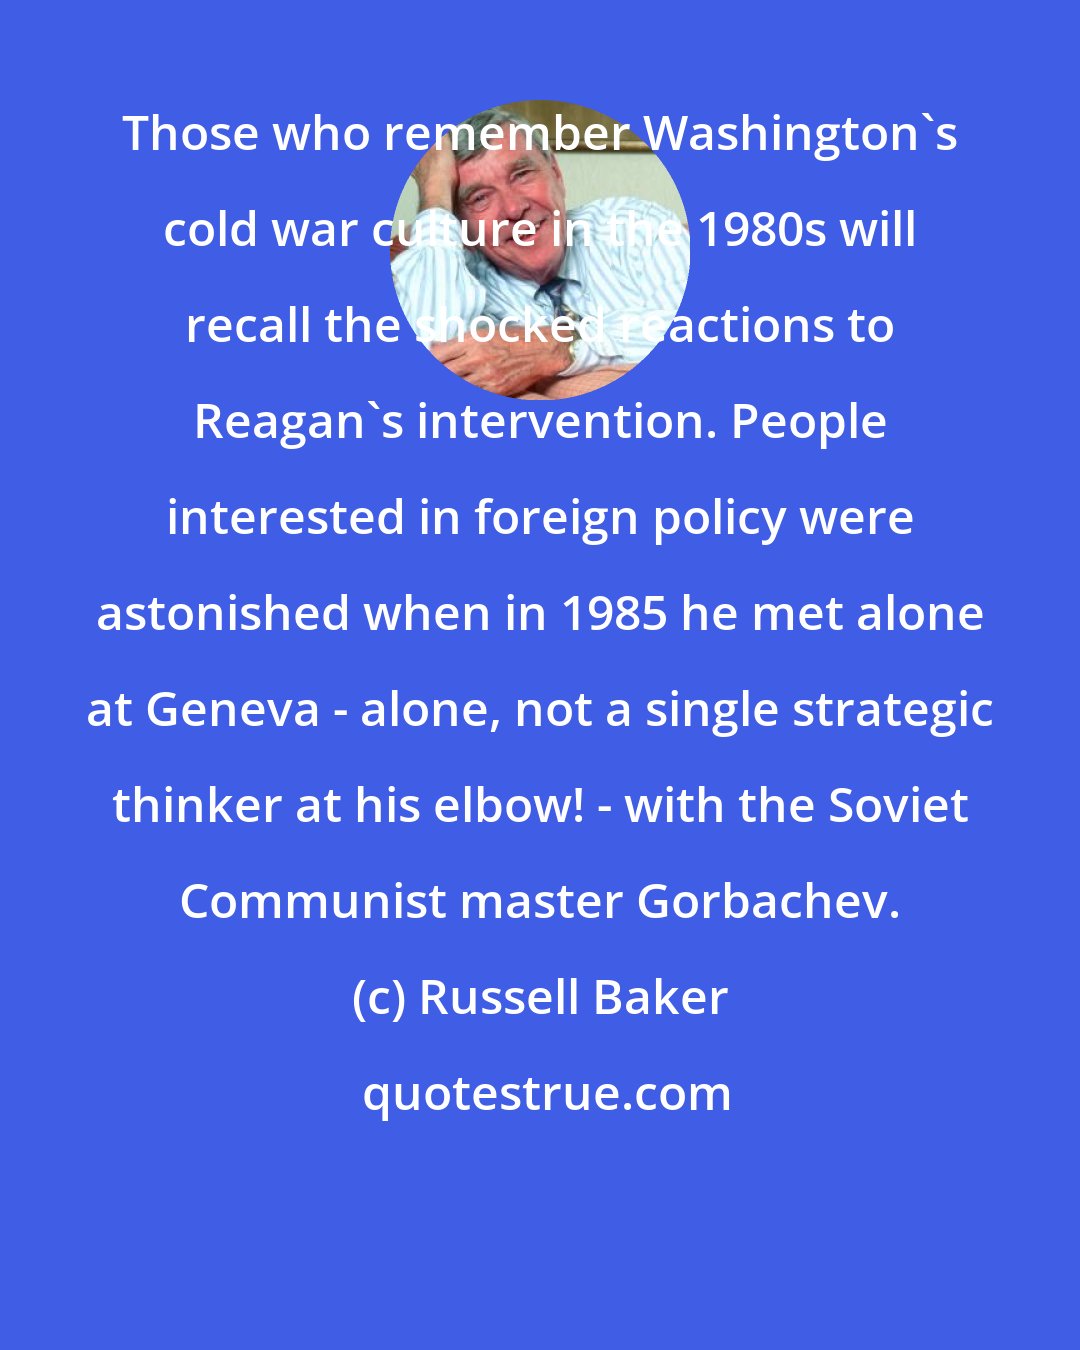 Russell Baker: Those who remember Washington's cold war culture in the 1980s will recall the shocked reactions to Reagan's intervention. People interested in foreign policy were astonished when in 1985 he met alone at Geneva - alone, not a single strategic thinker at his elbow! - with the Soviet Communist master Gorbachev.